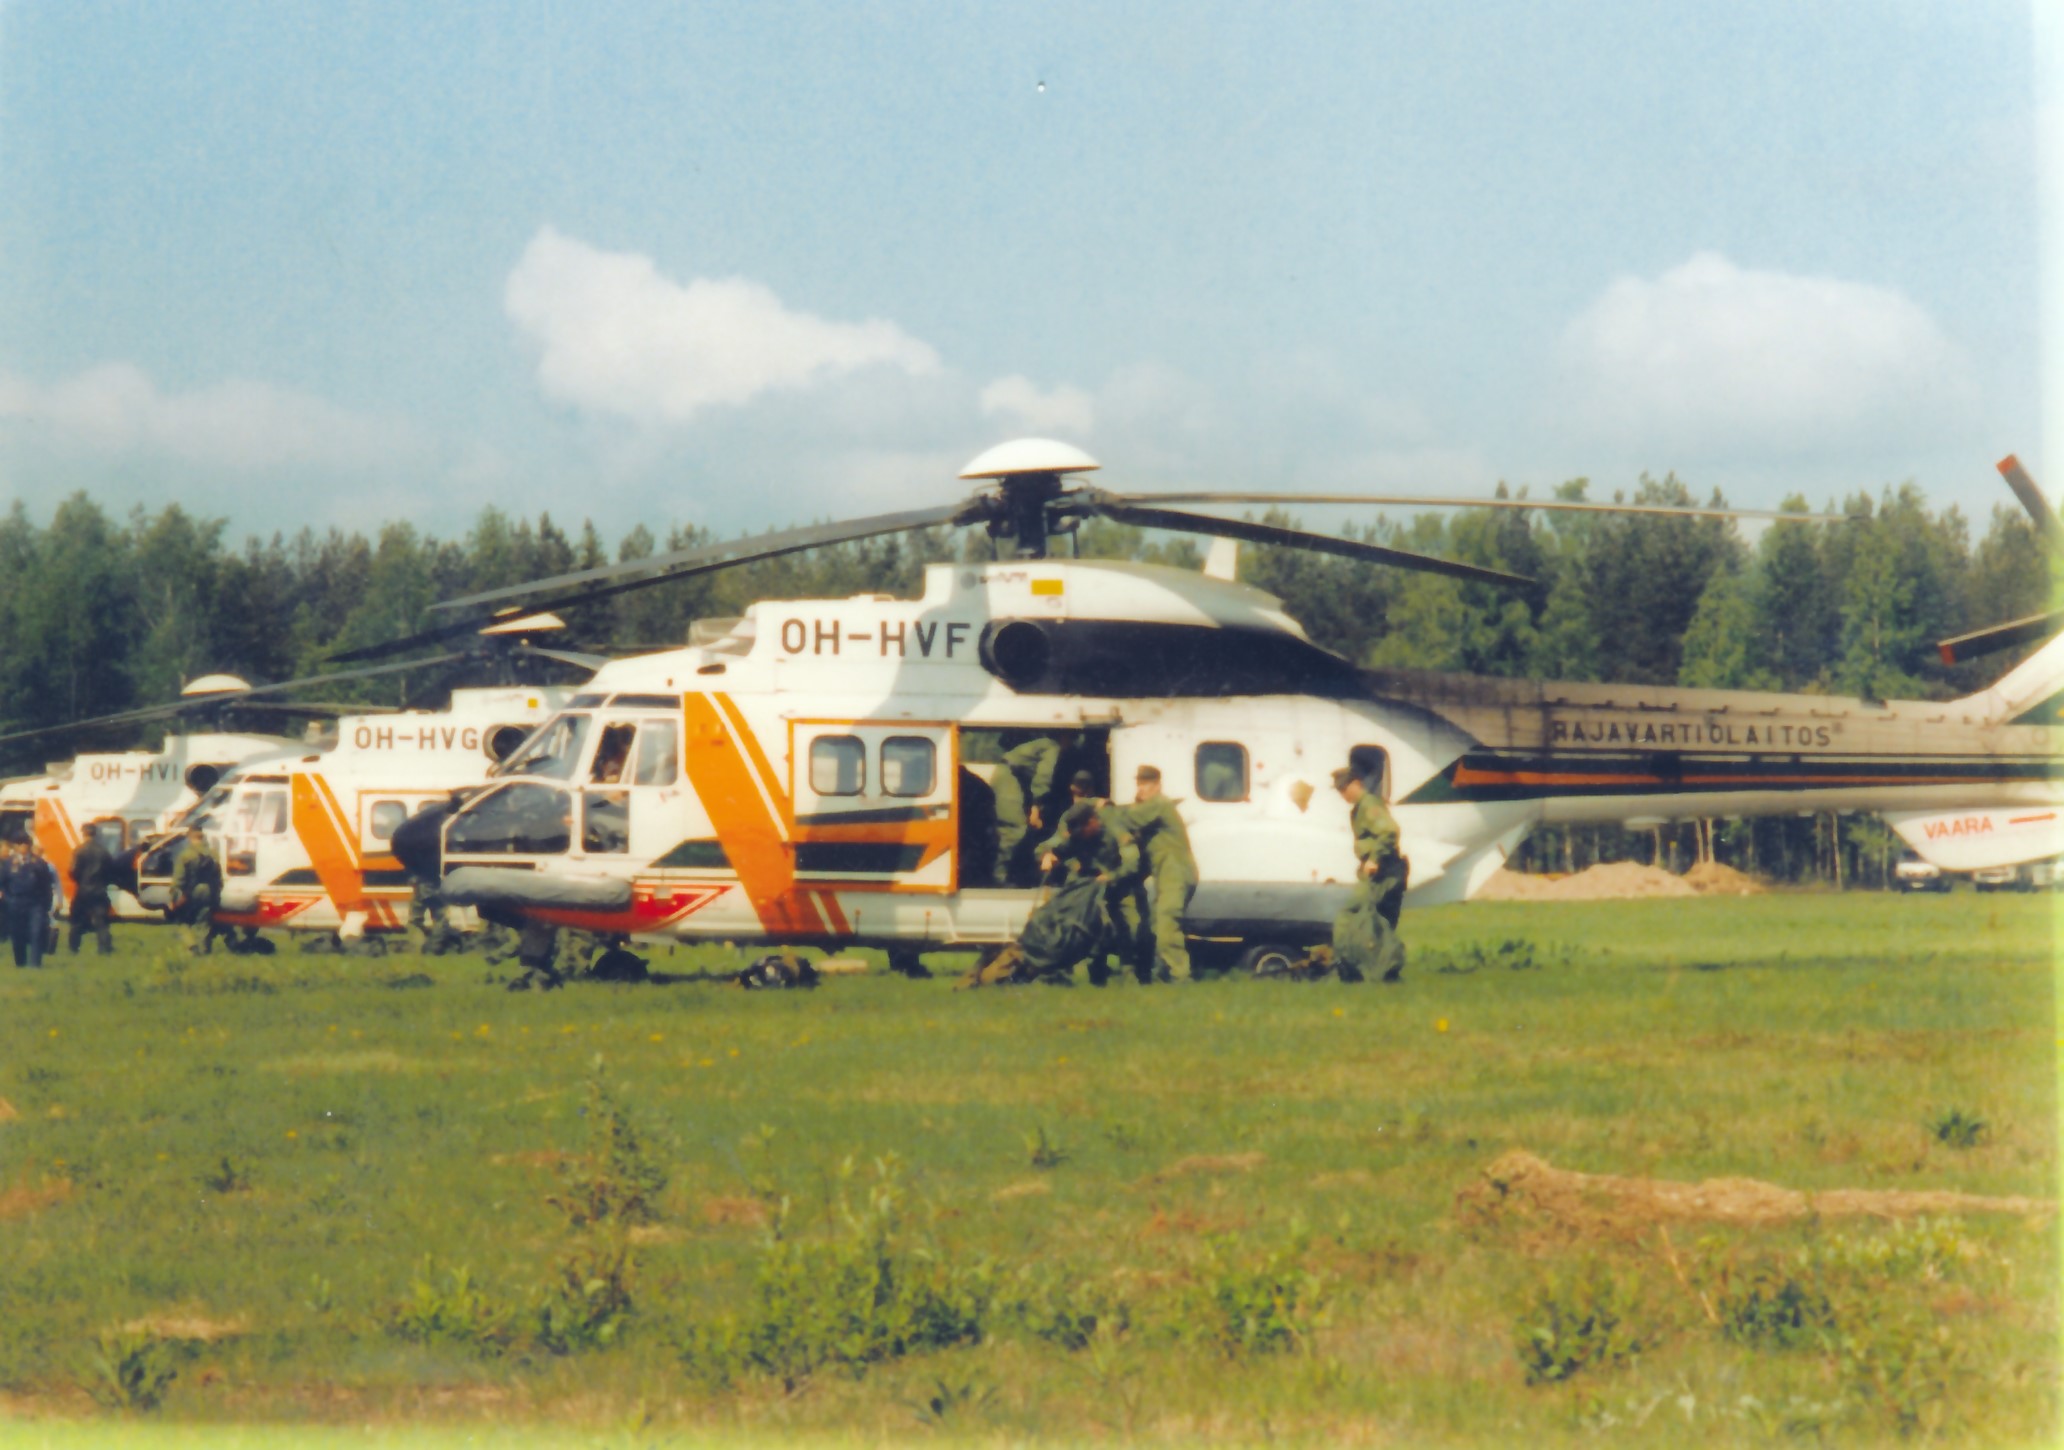 Three helicopters have landed on a grass field. A group of men are unloading equipment from the foremost helicopter.